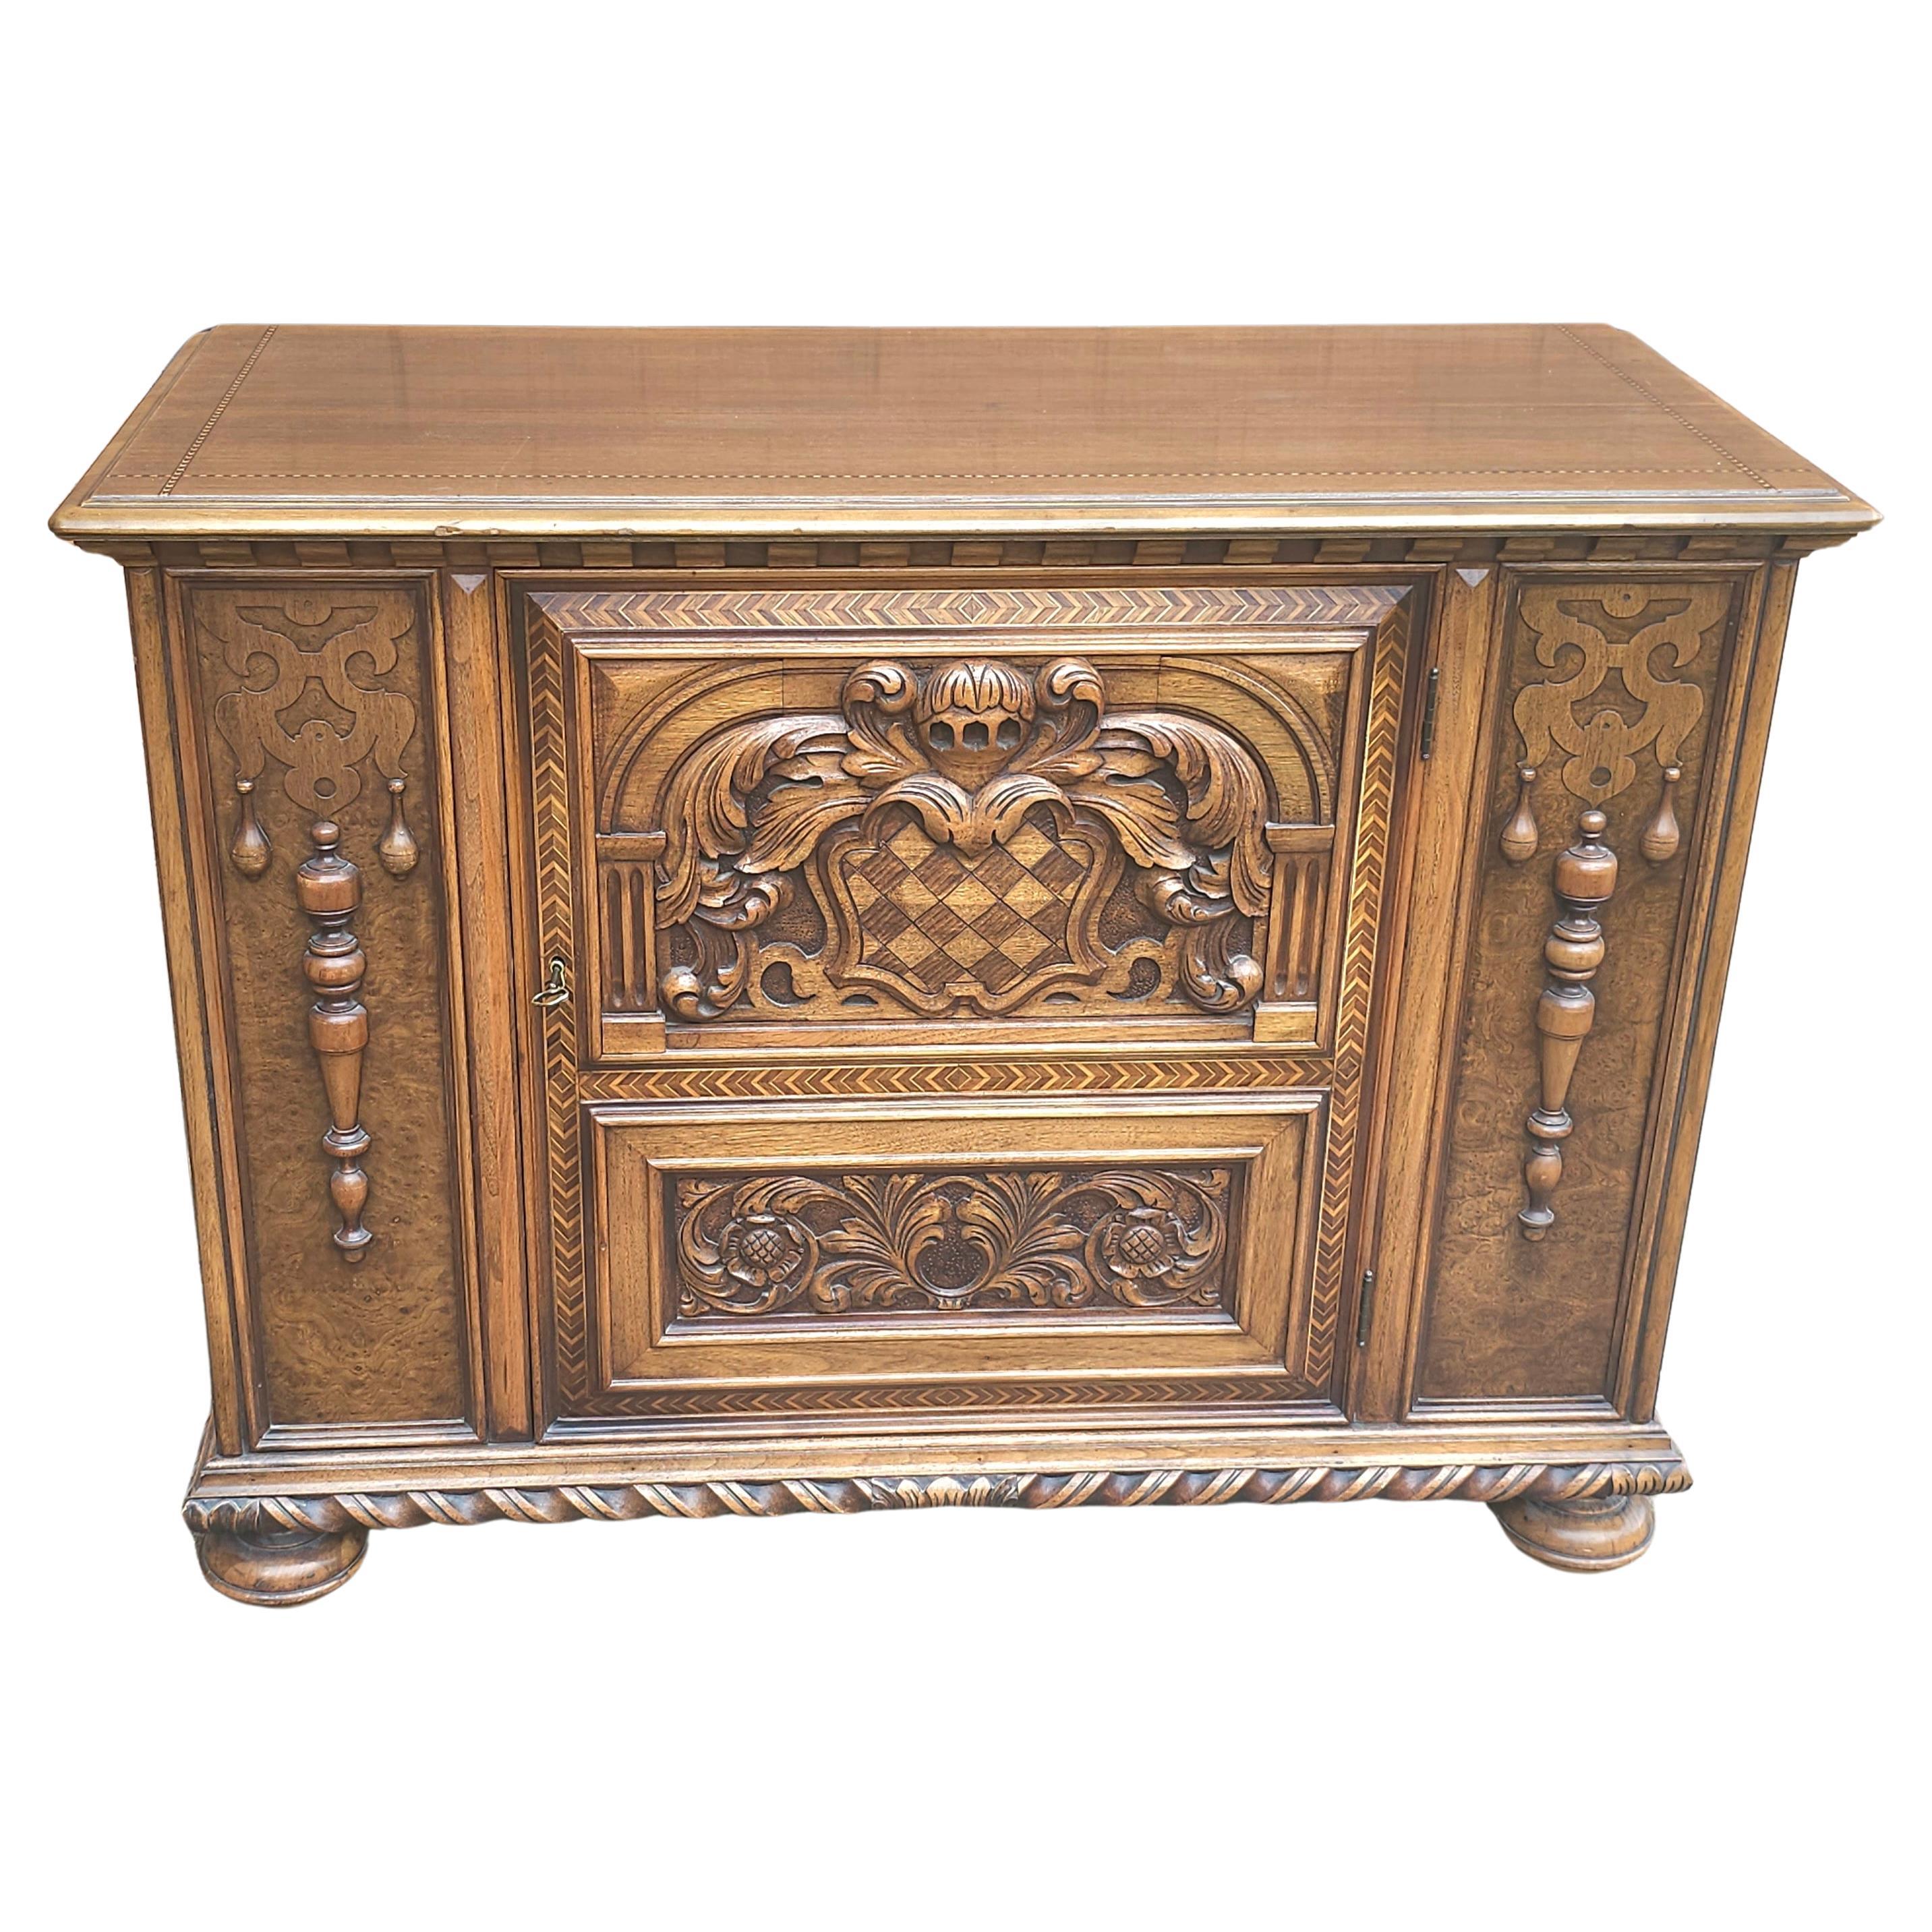 Early 20th C William and Mary Brazilian Rosewood and Burl Walnut Inlaid Cabinet For Sale